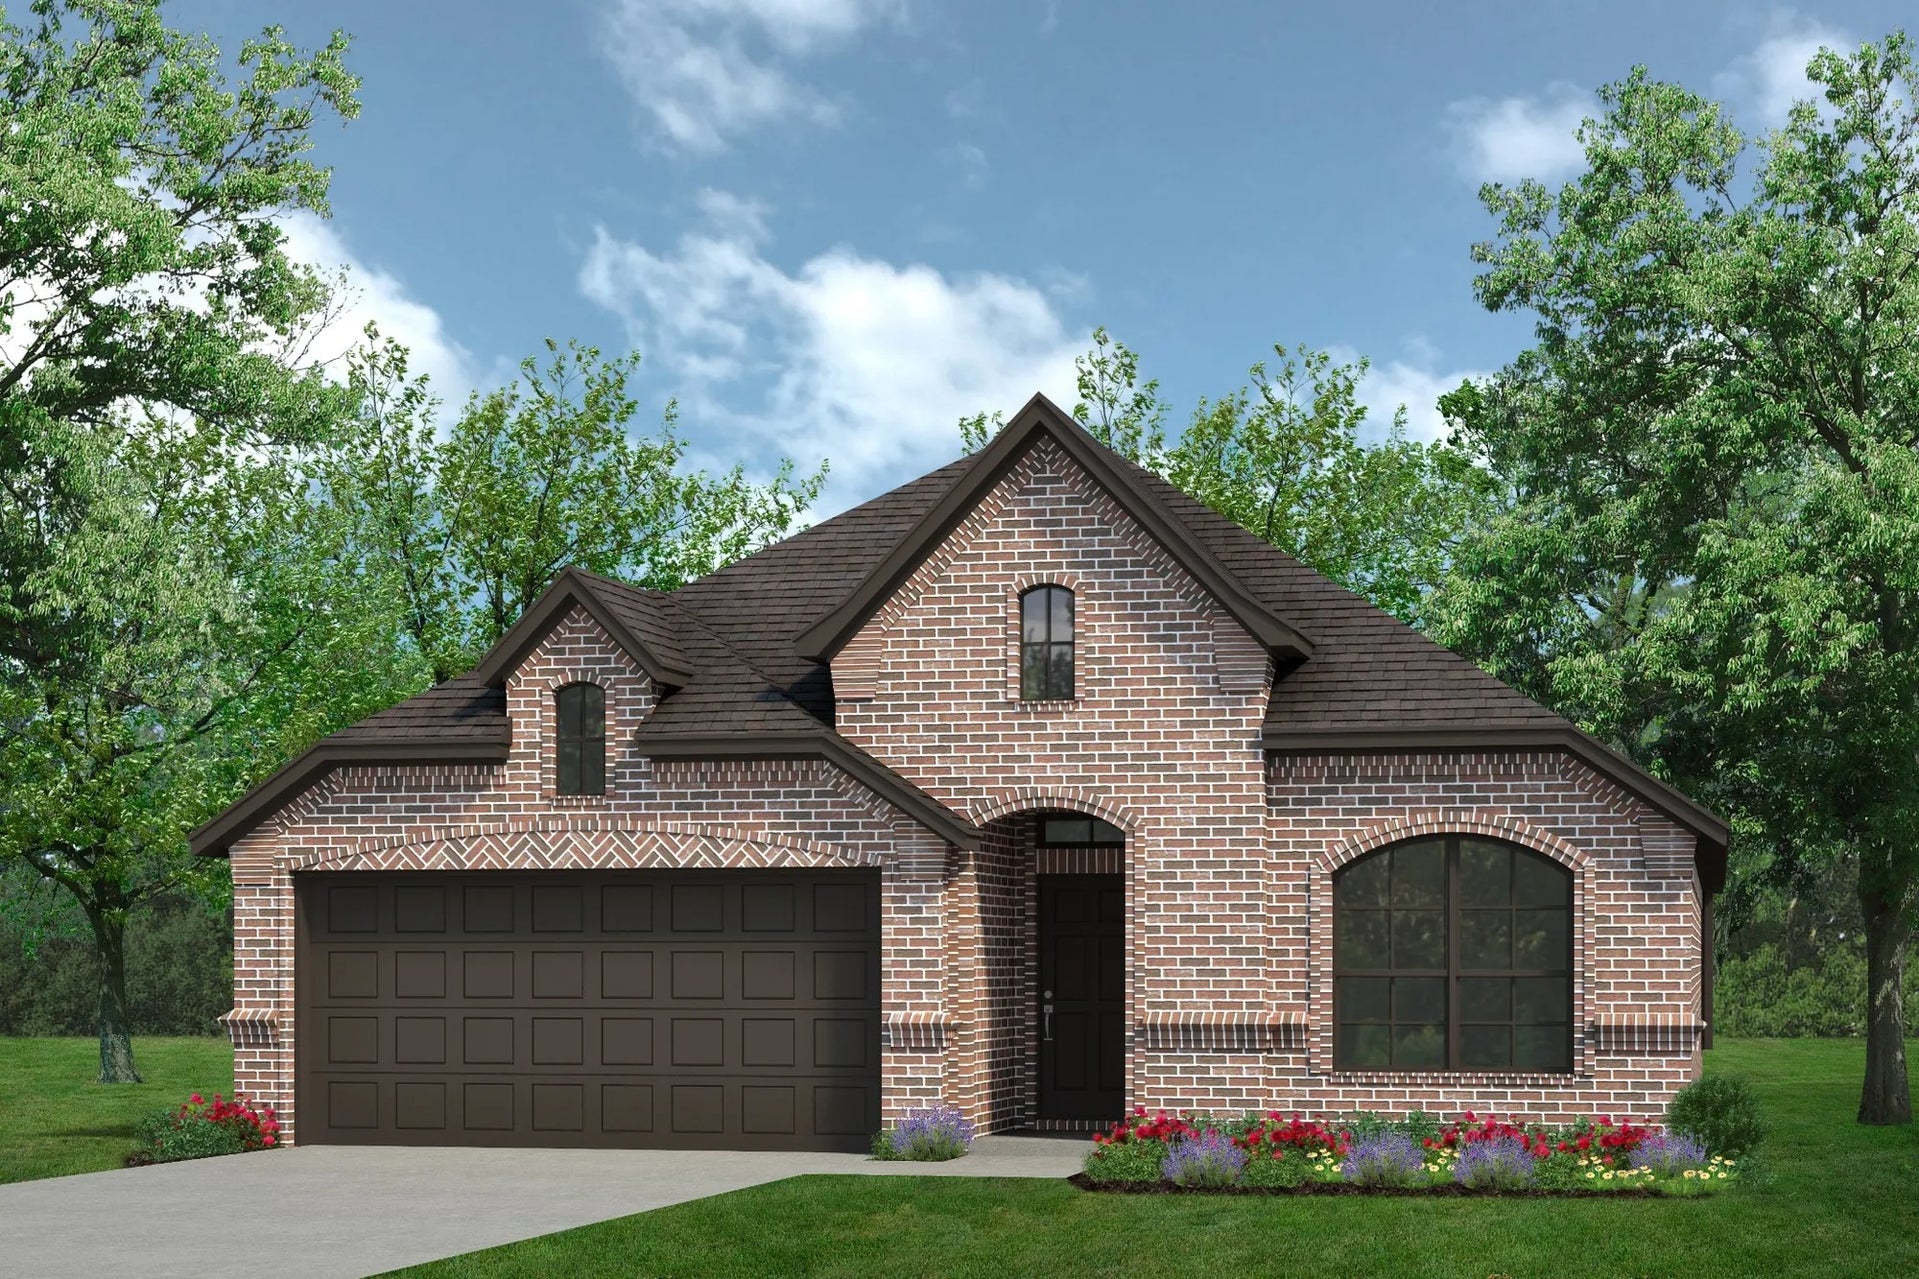 1912 C. 4br New Home in Crowley, TX